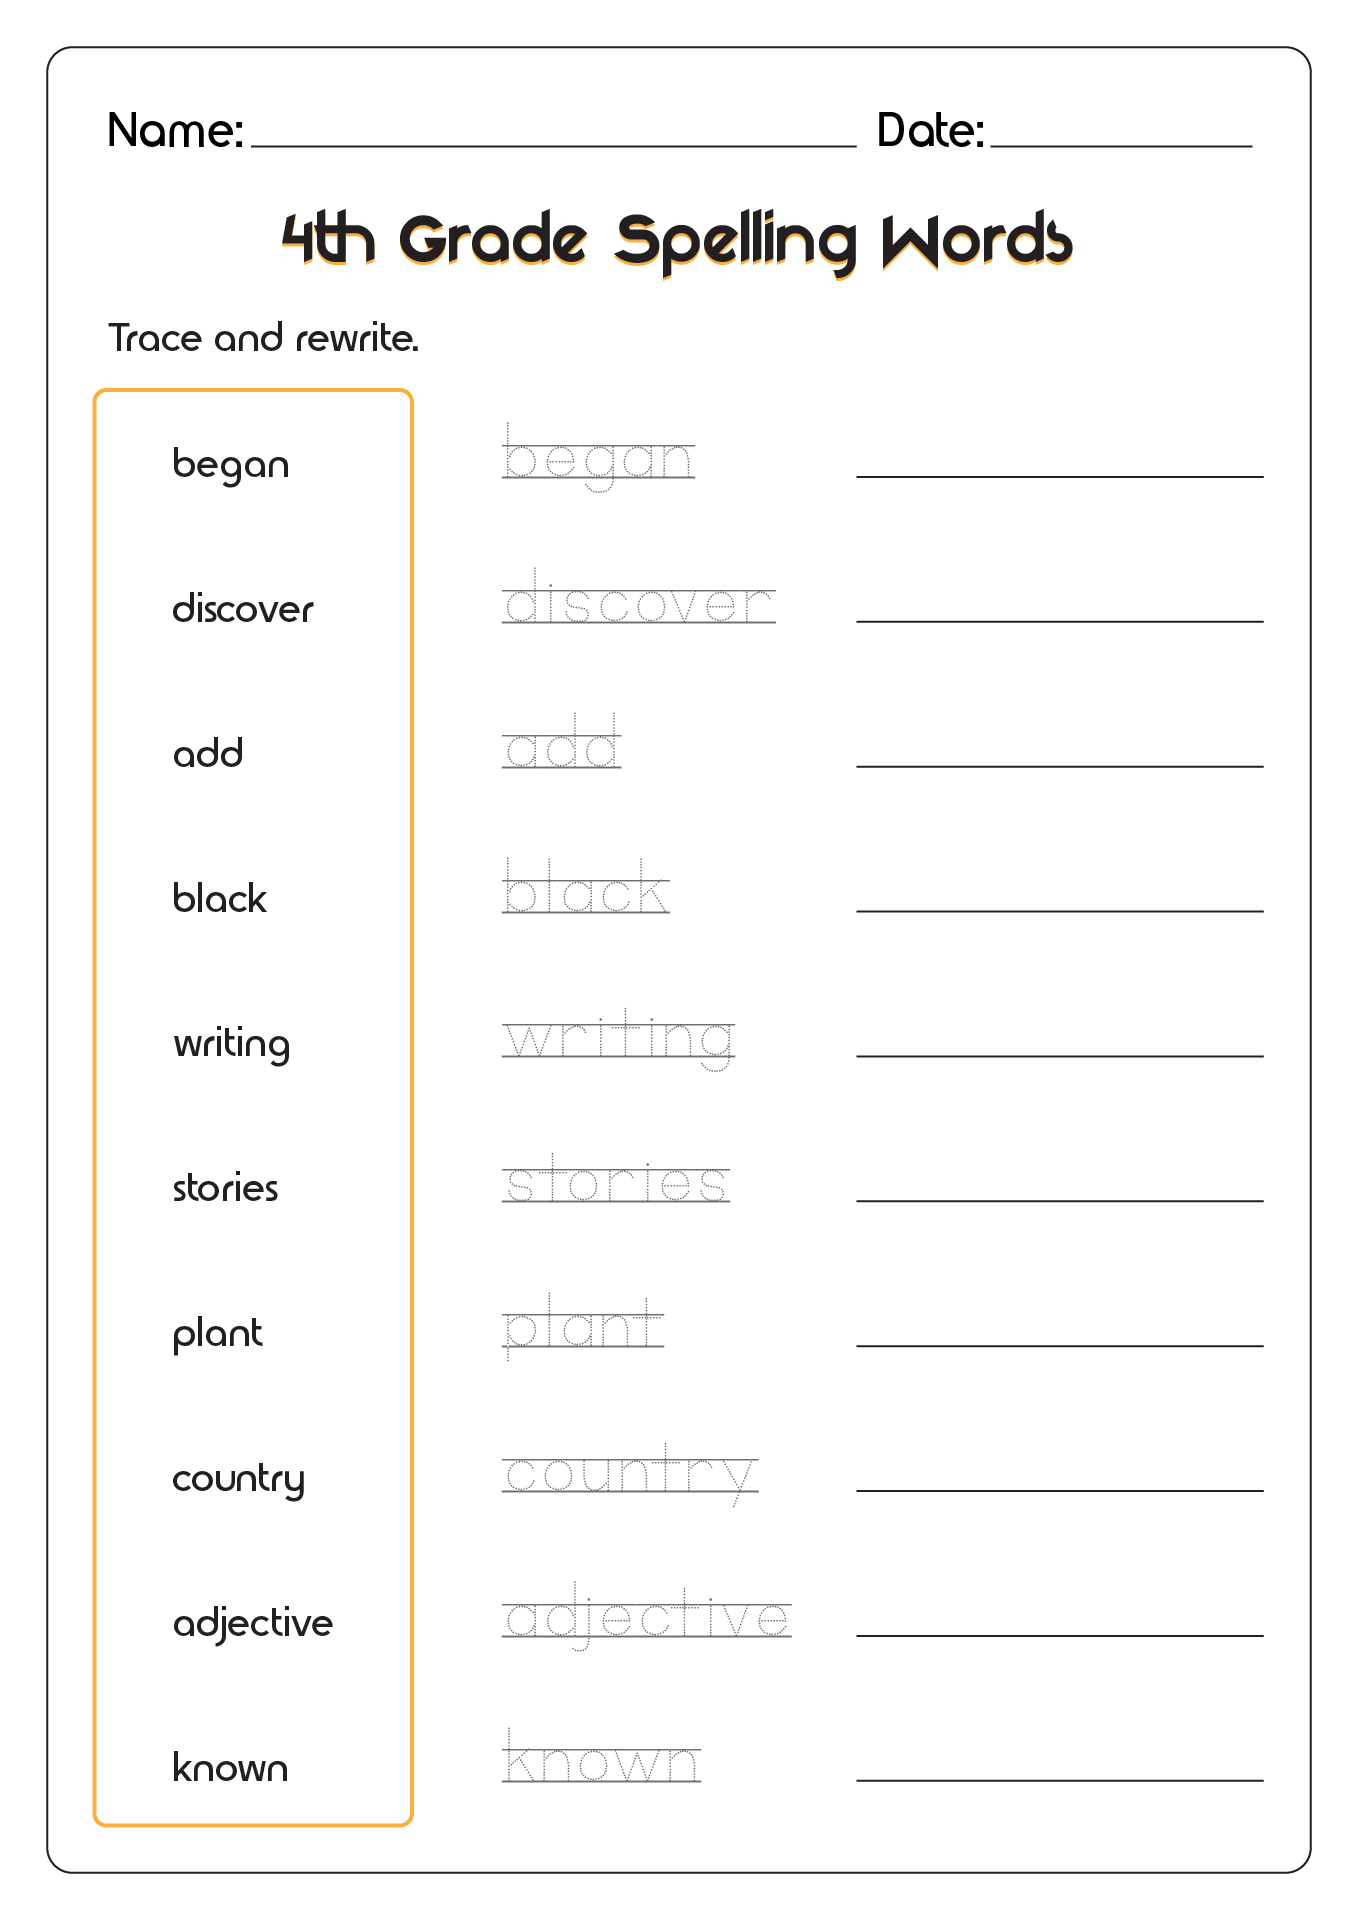 13-best-images-of-spelling-list-worksheets-4th-grade-spelling-word-list-for-the-year-spelling